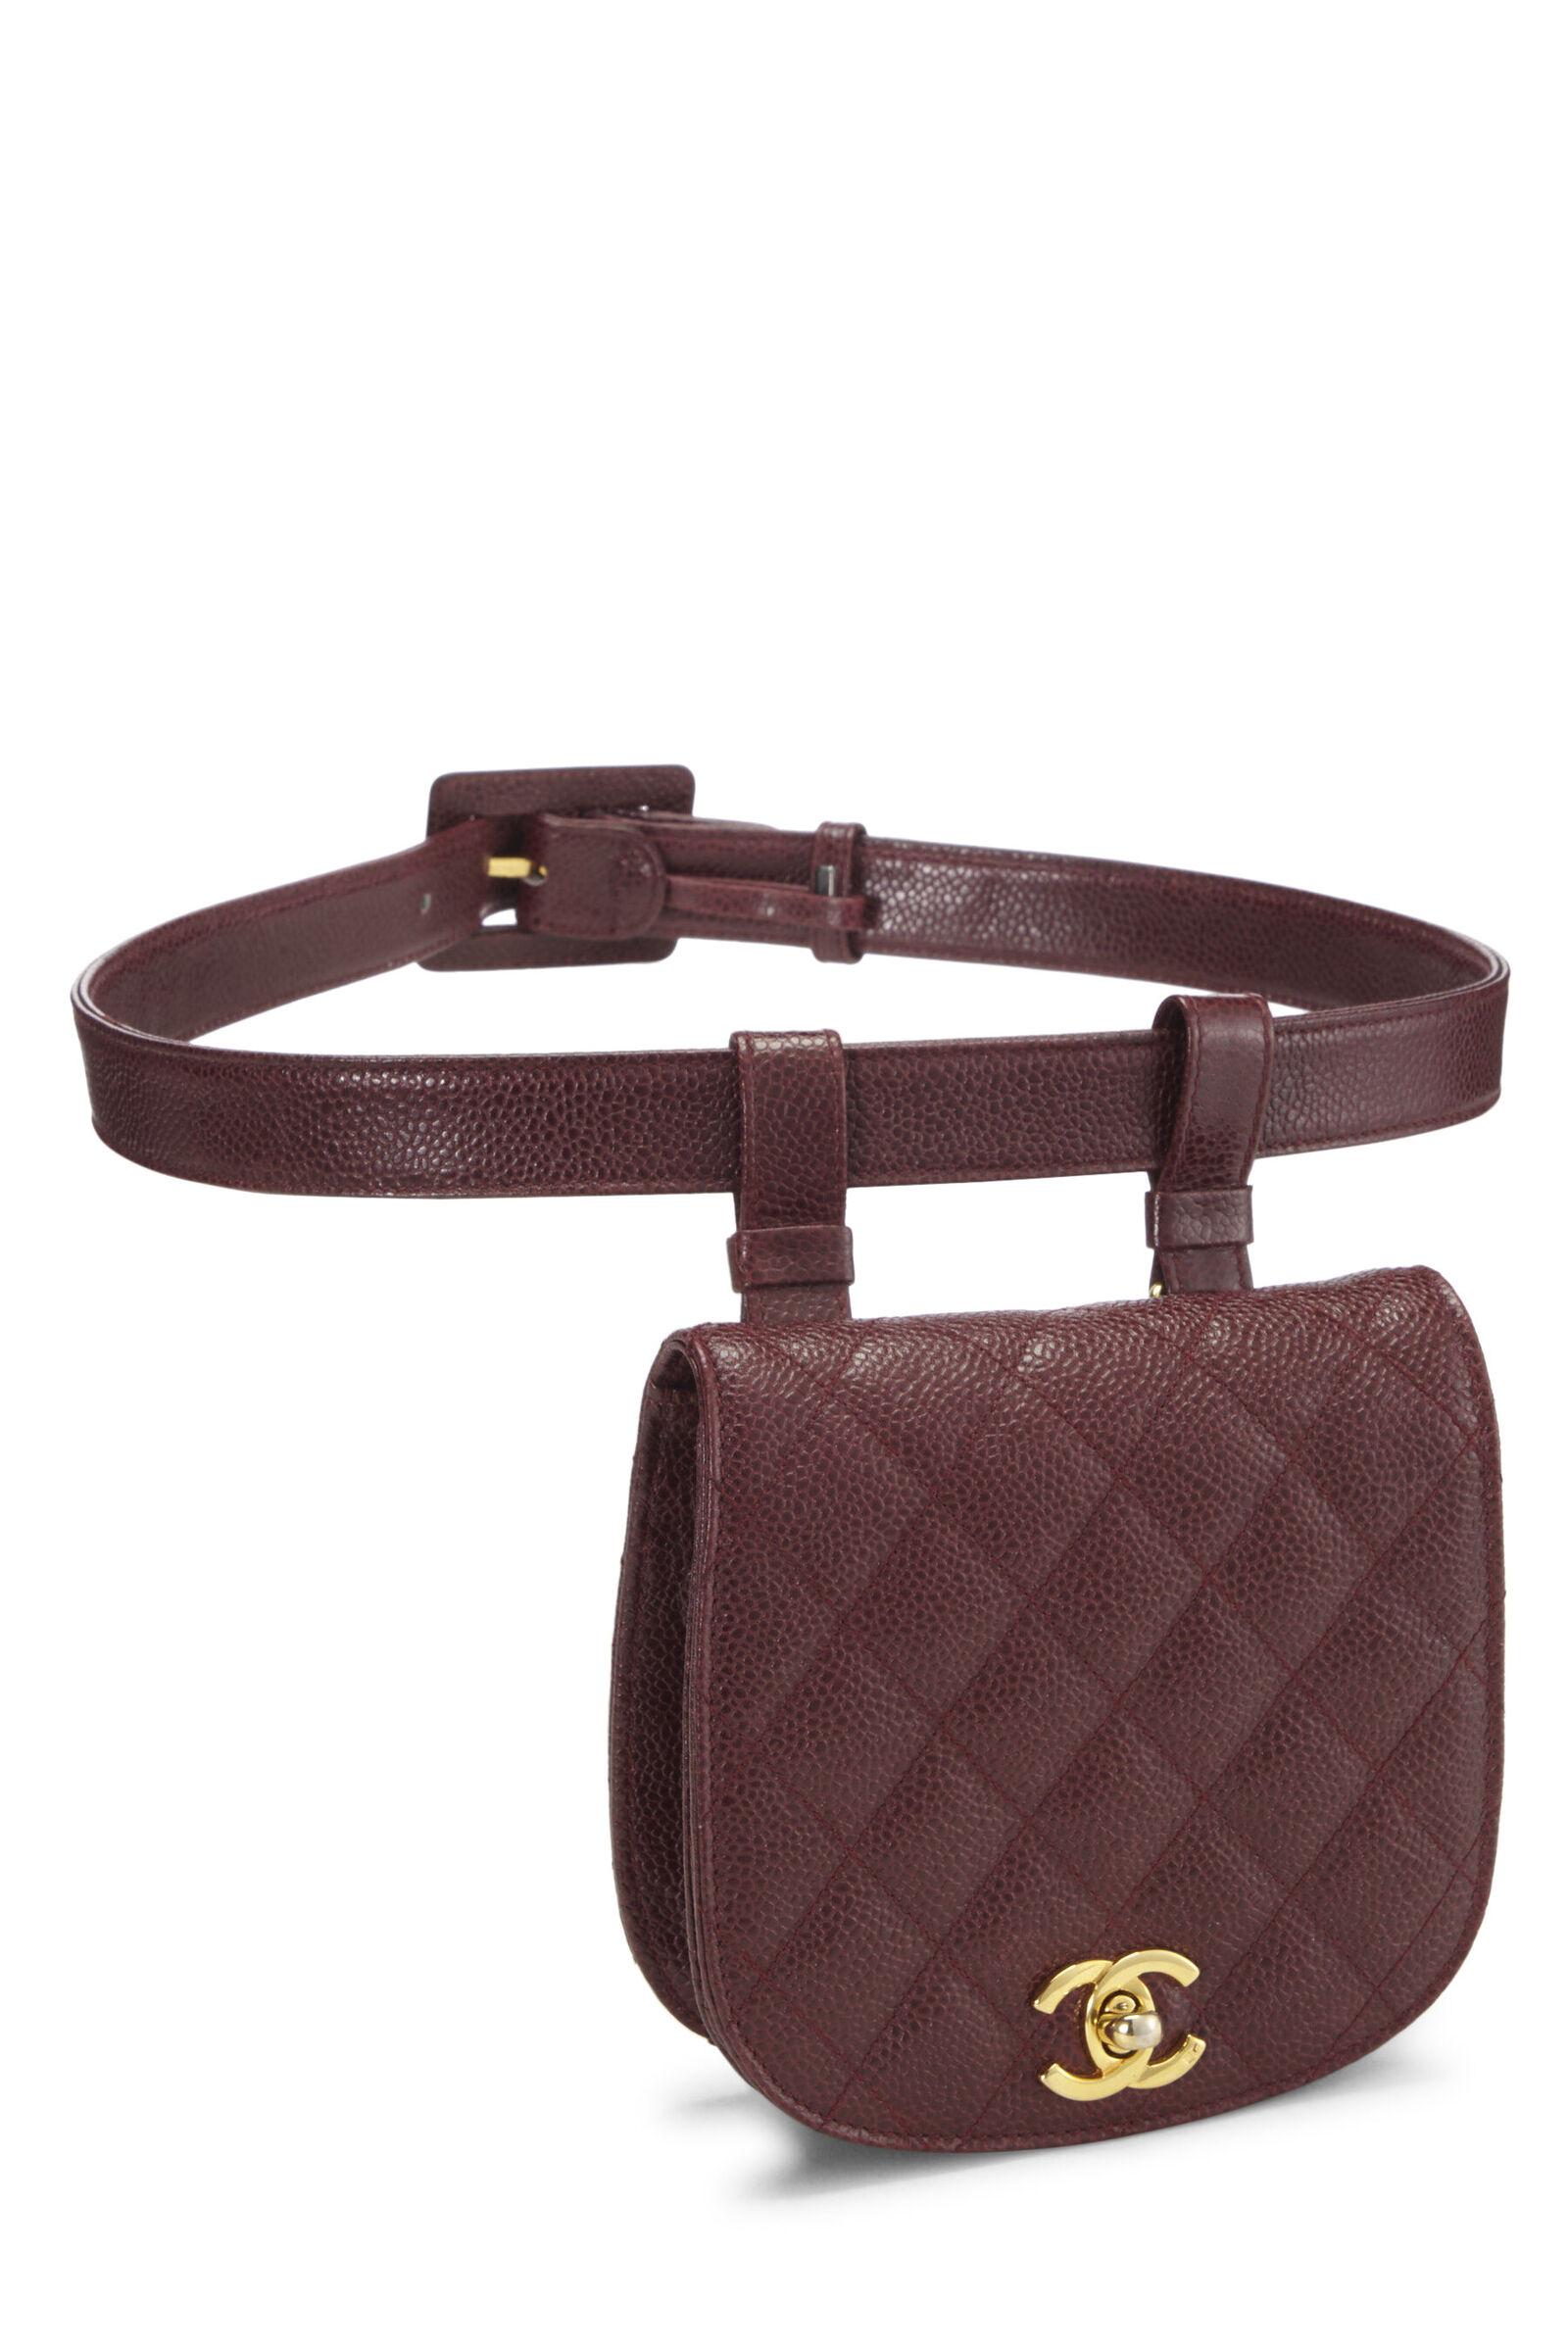 Chanel 1991 Classic Flap Red Burgundy Quilted Caviar Waist Belt Bag In Good Condition For Sale In Miami, FL